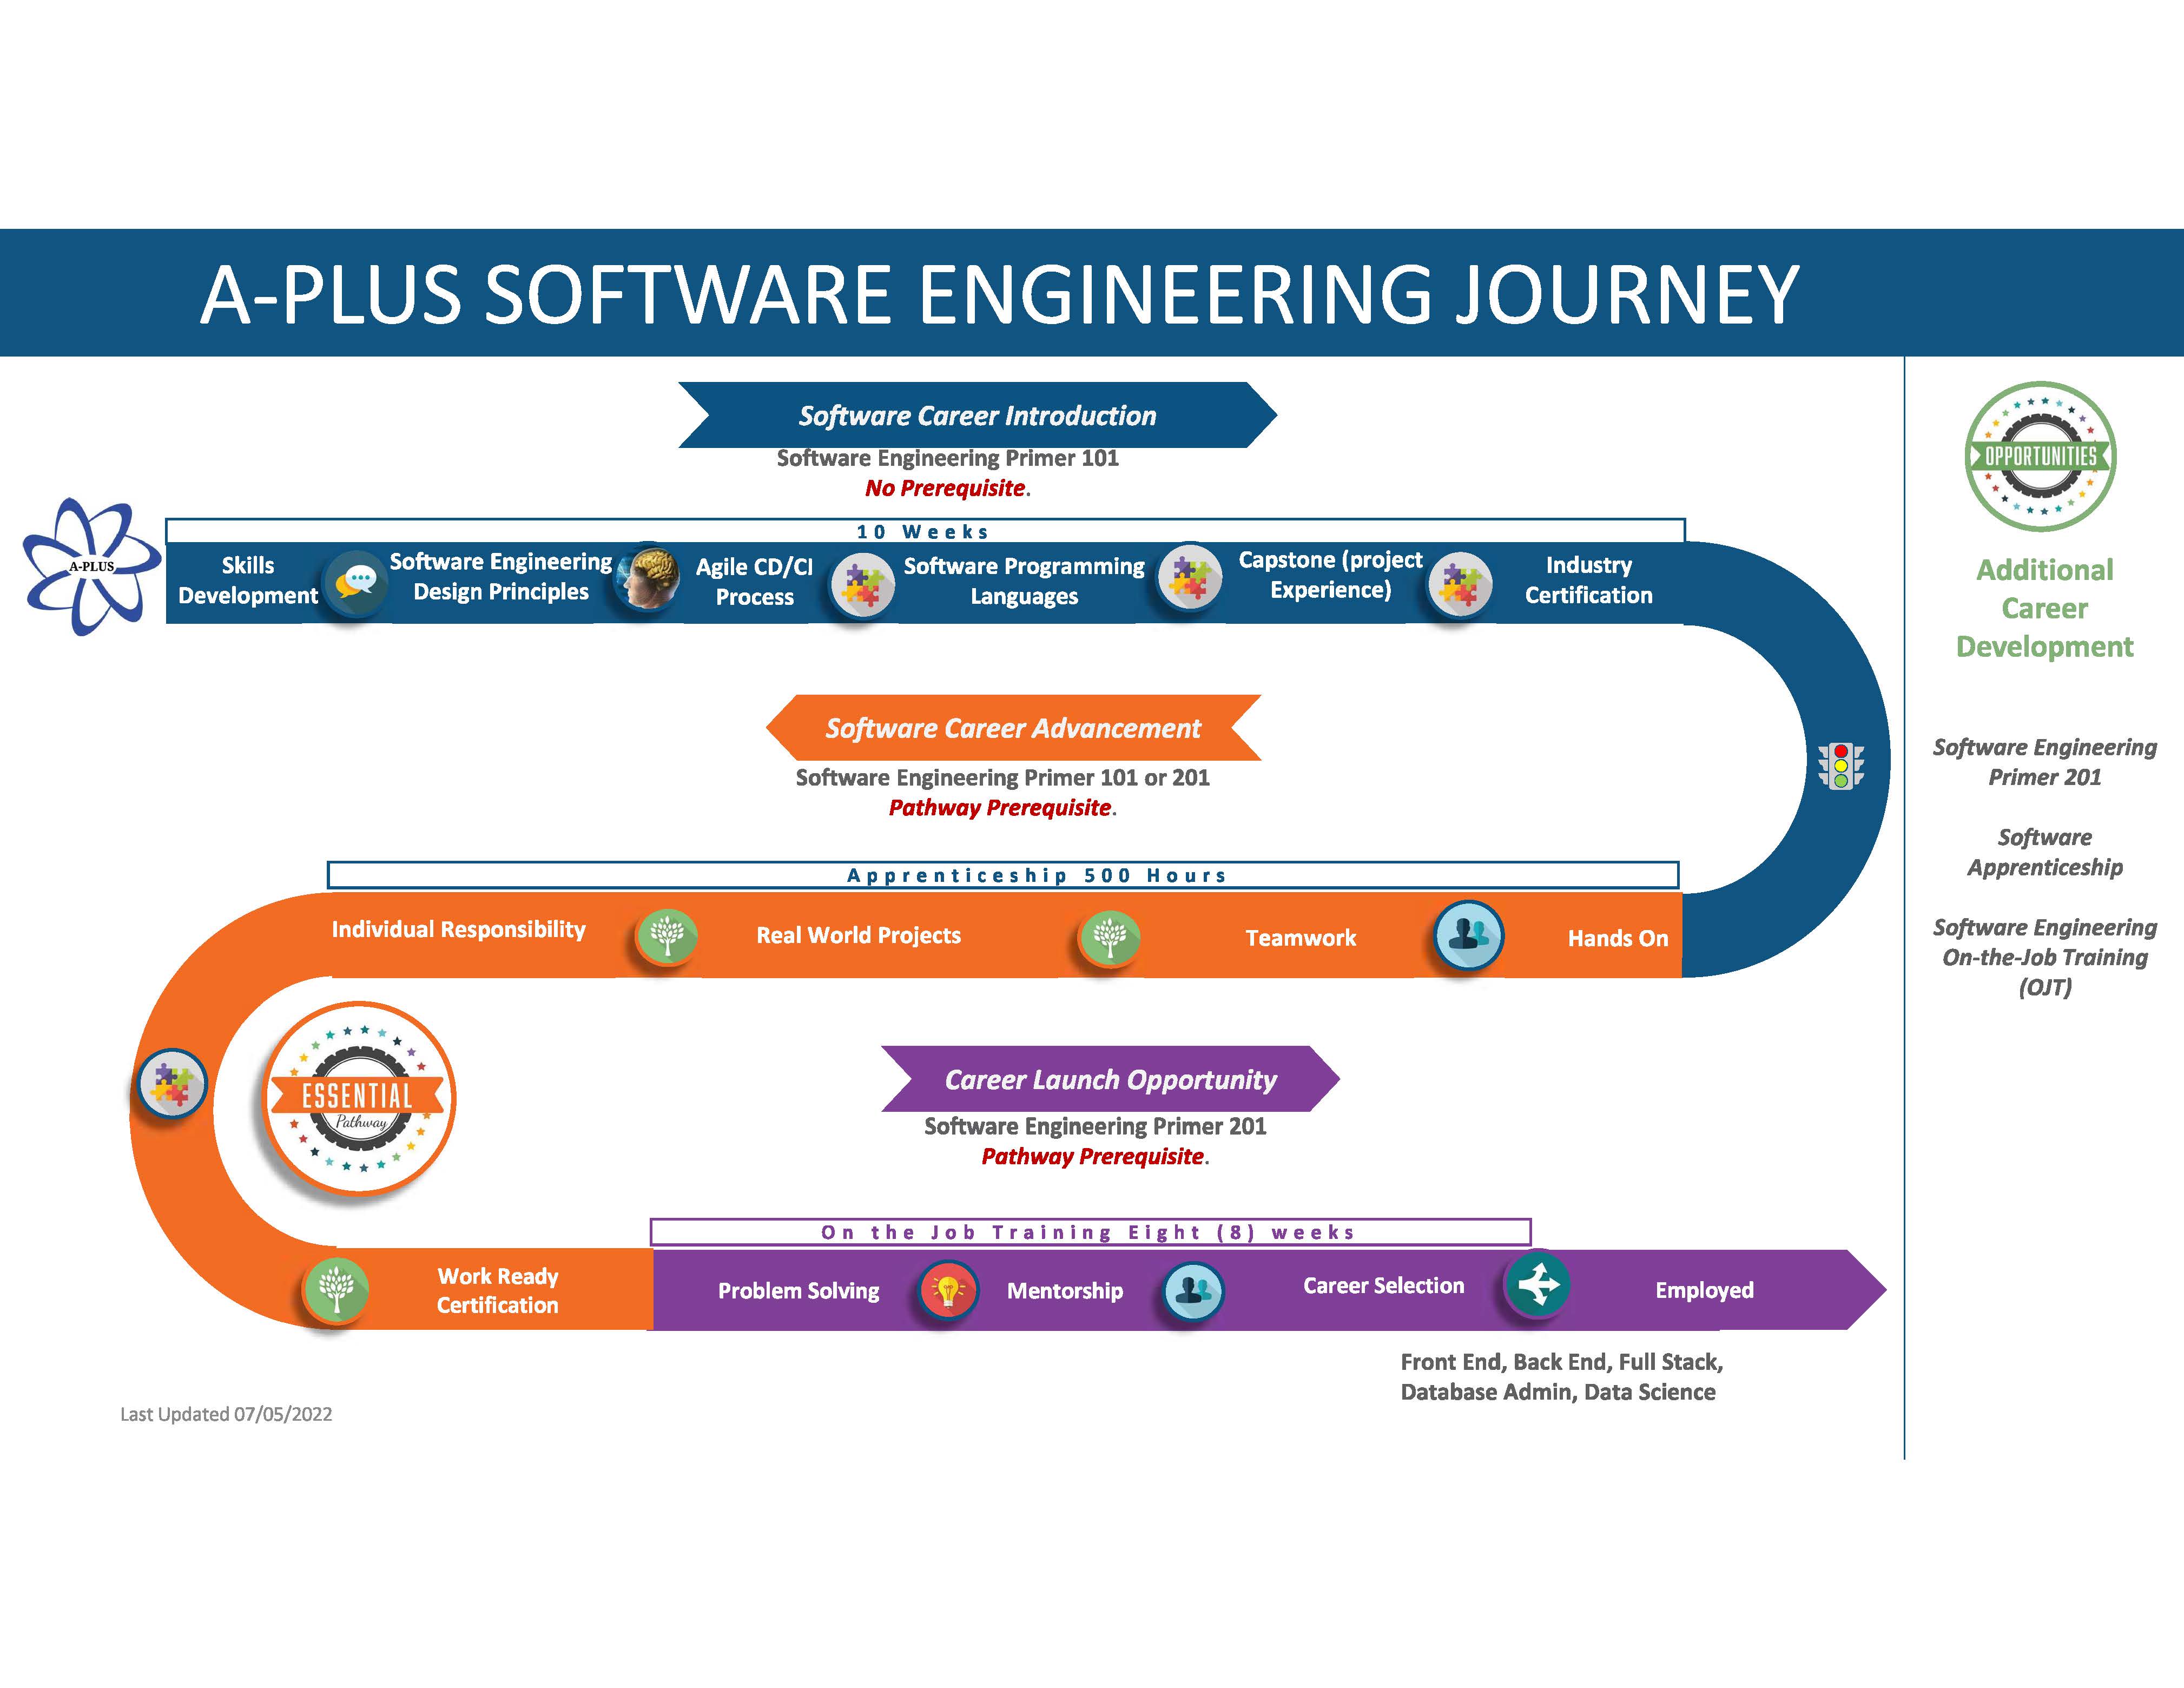 A-PLUS Software Engineering Journey Infographic.jpg